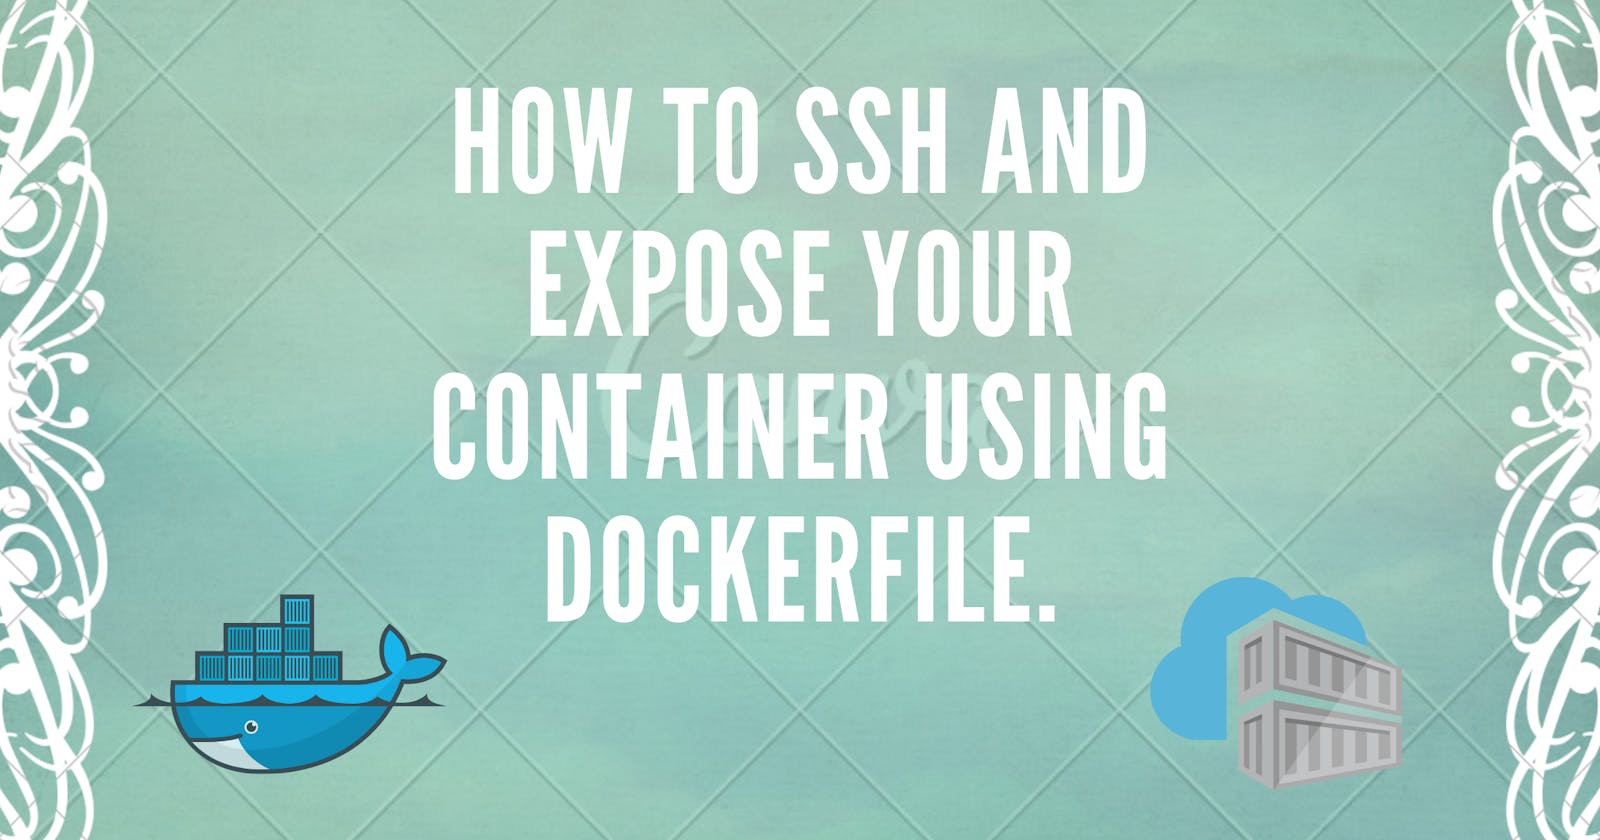 How to SSH and Expose your container using Dockerfile in 3 STEPS.